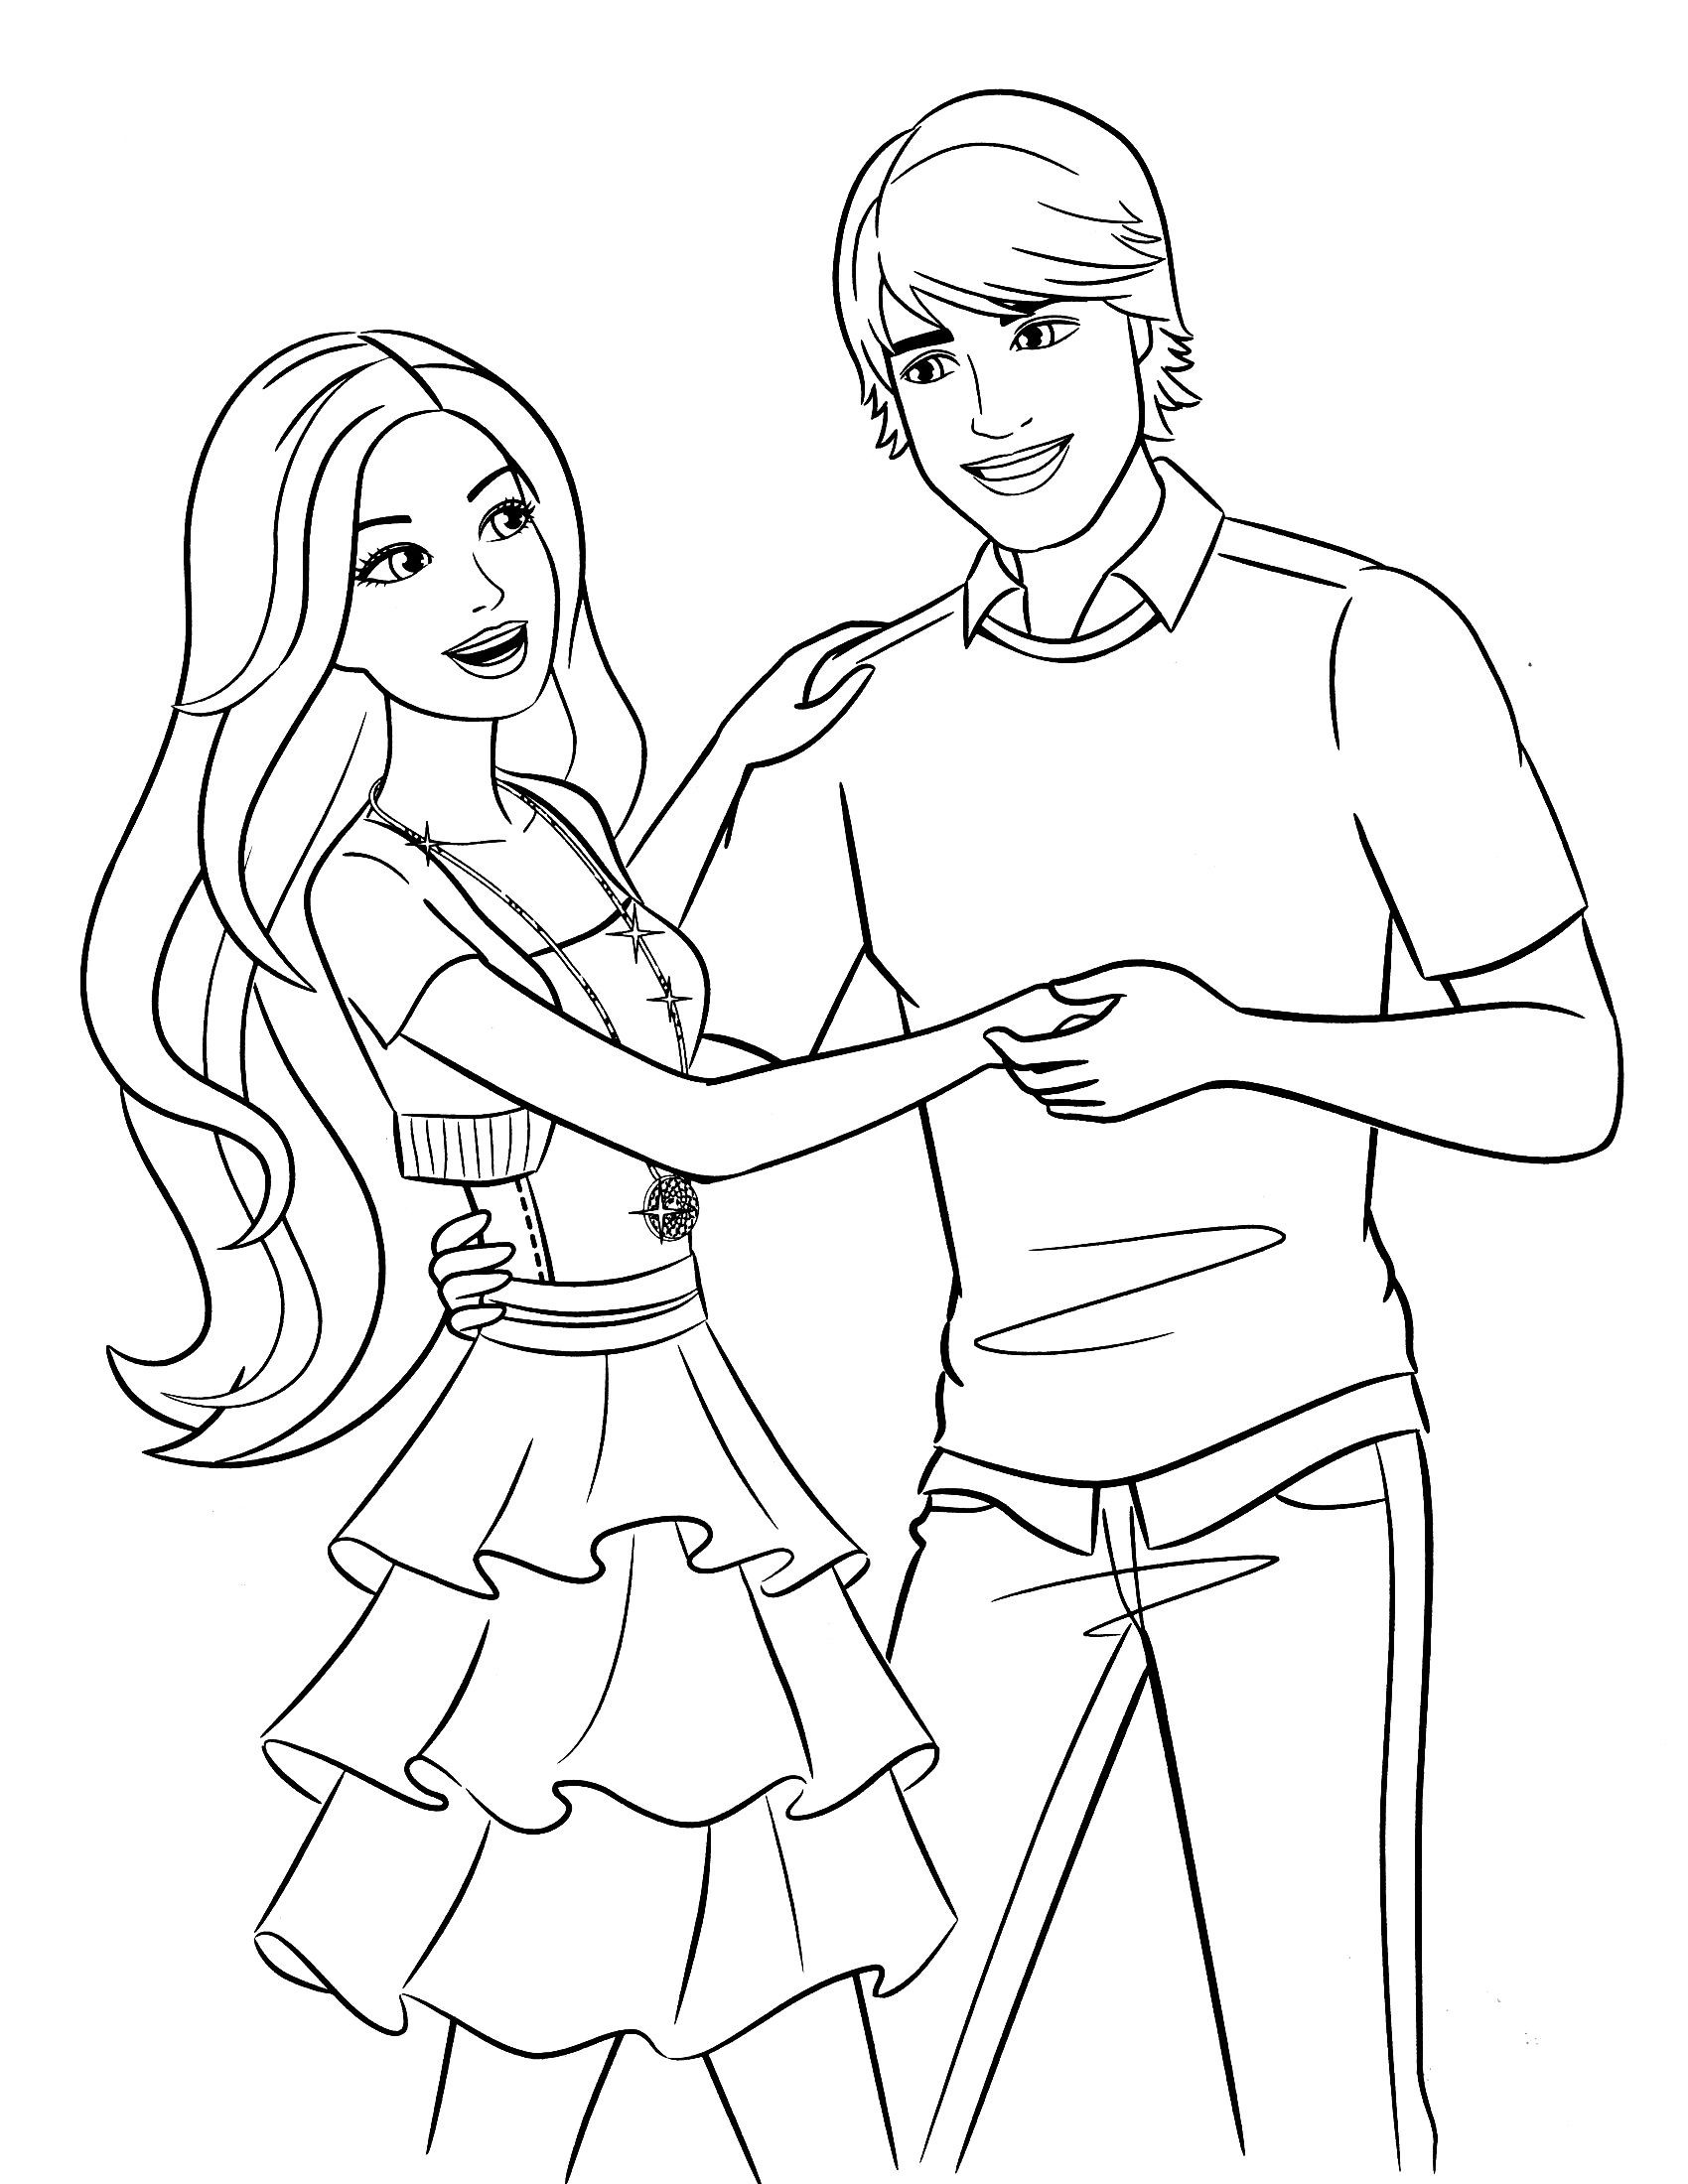 Barbie Coloring Pages For Girls
 Pin de Erica Heitz em Coloring Pages